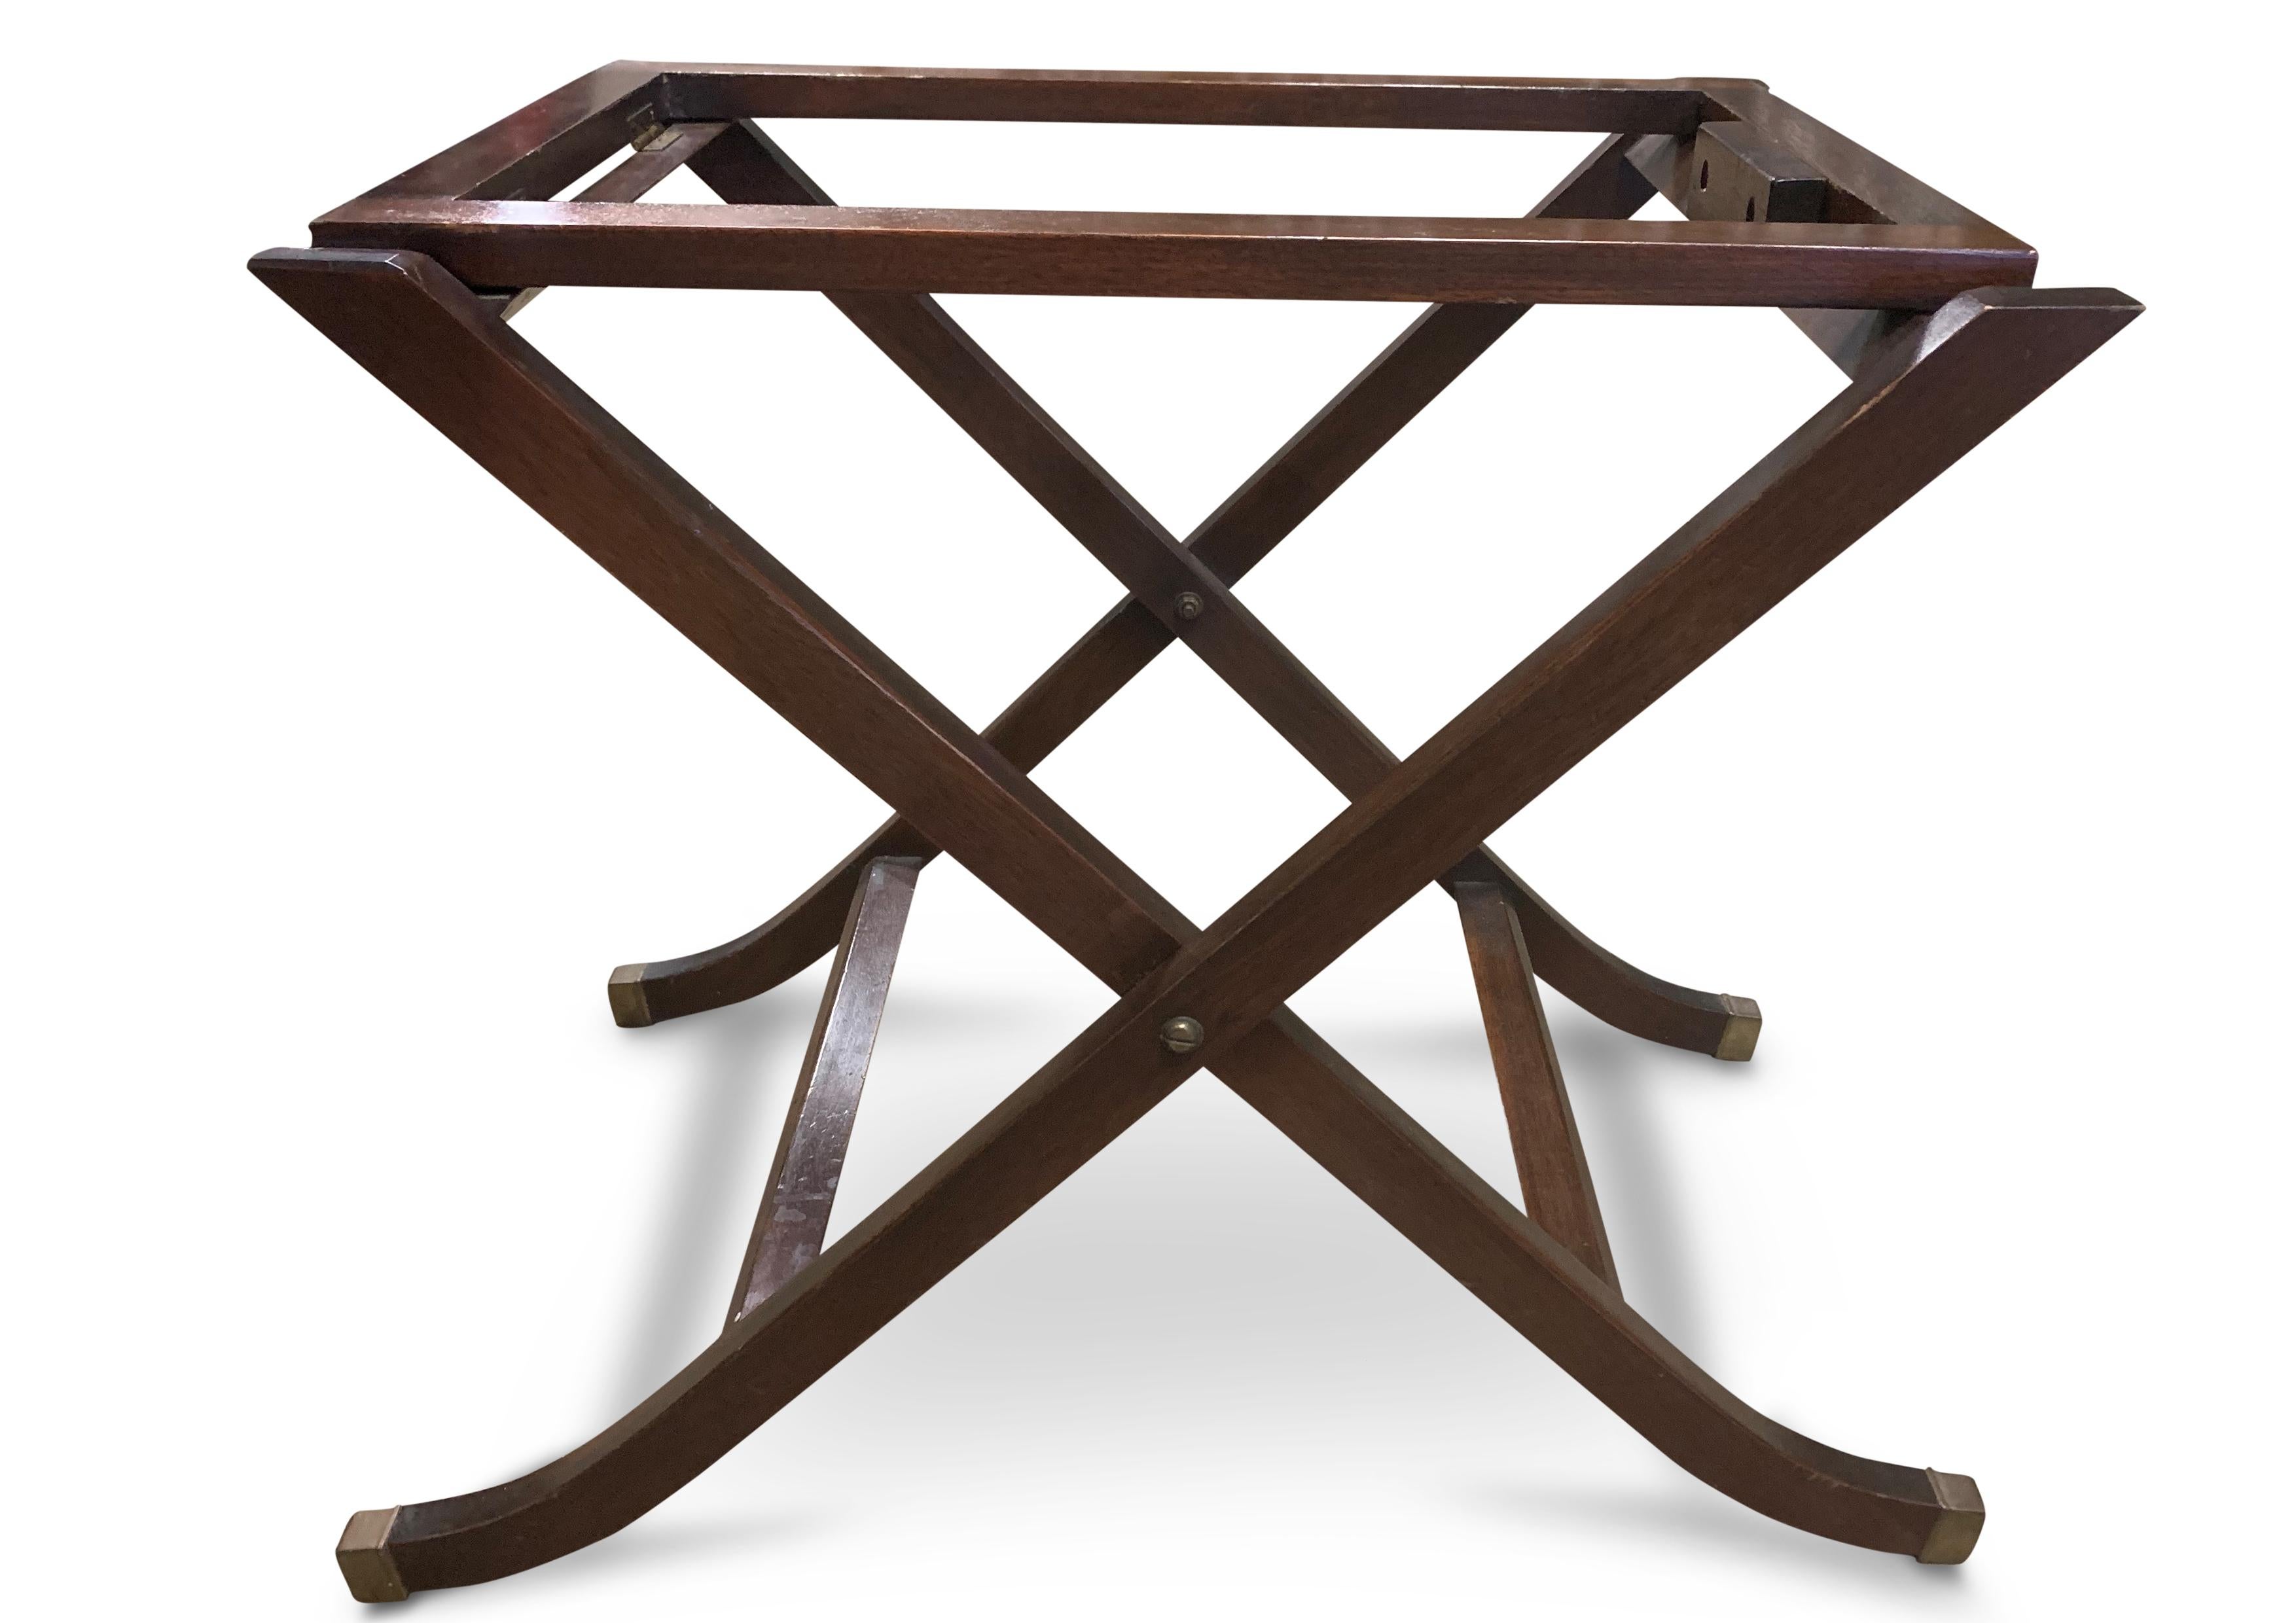 Bevan Funnell Military Campaigner Design George III Butlers Tray et Folding Stand Bon état - En vente à High Wycombe, GB